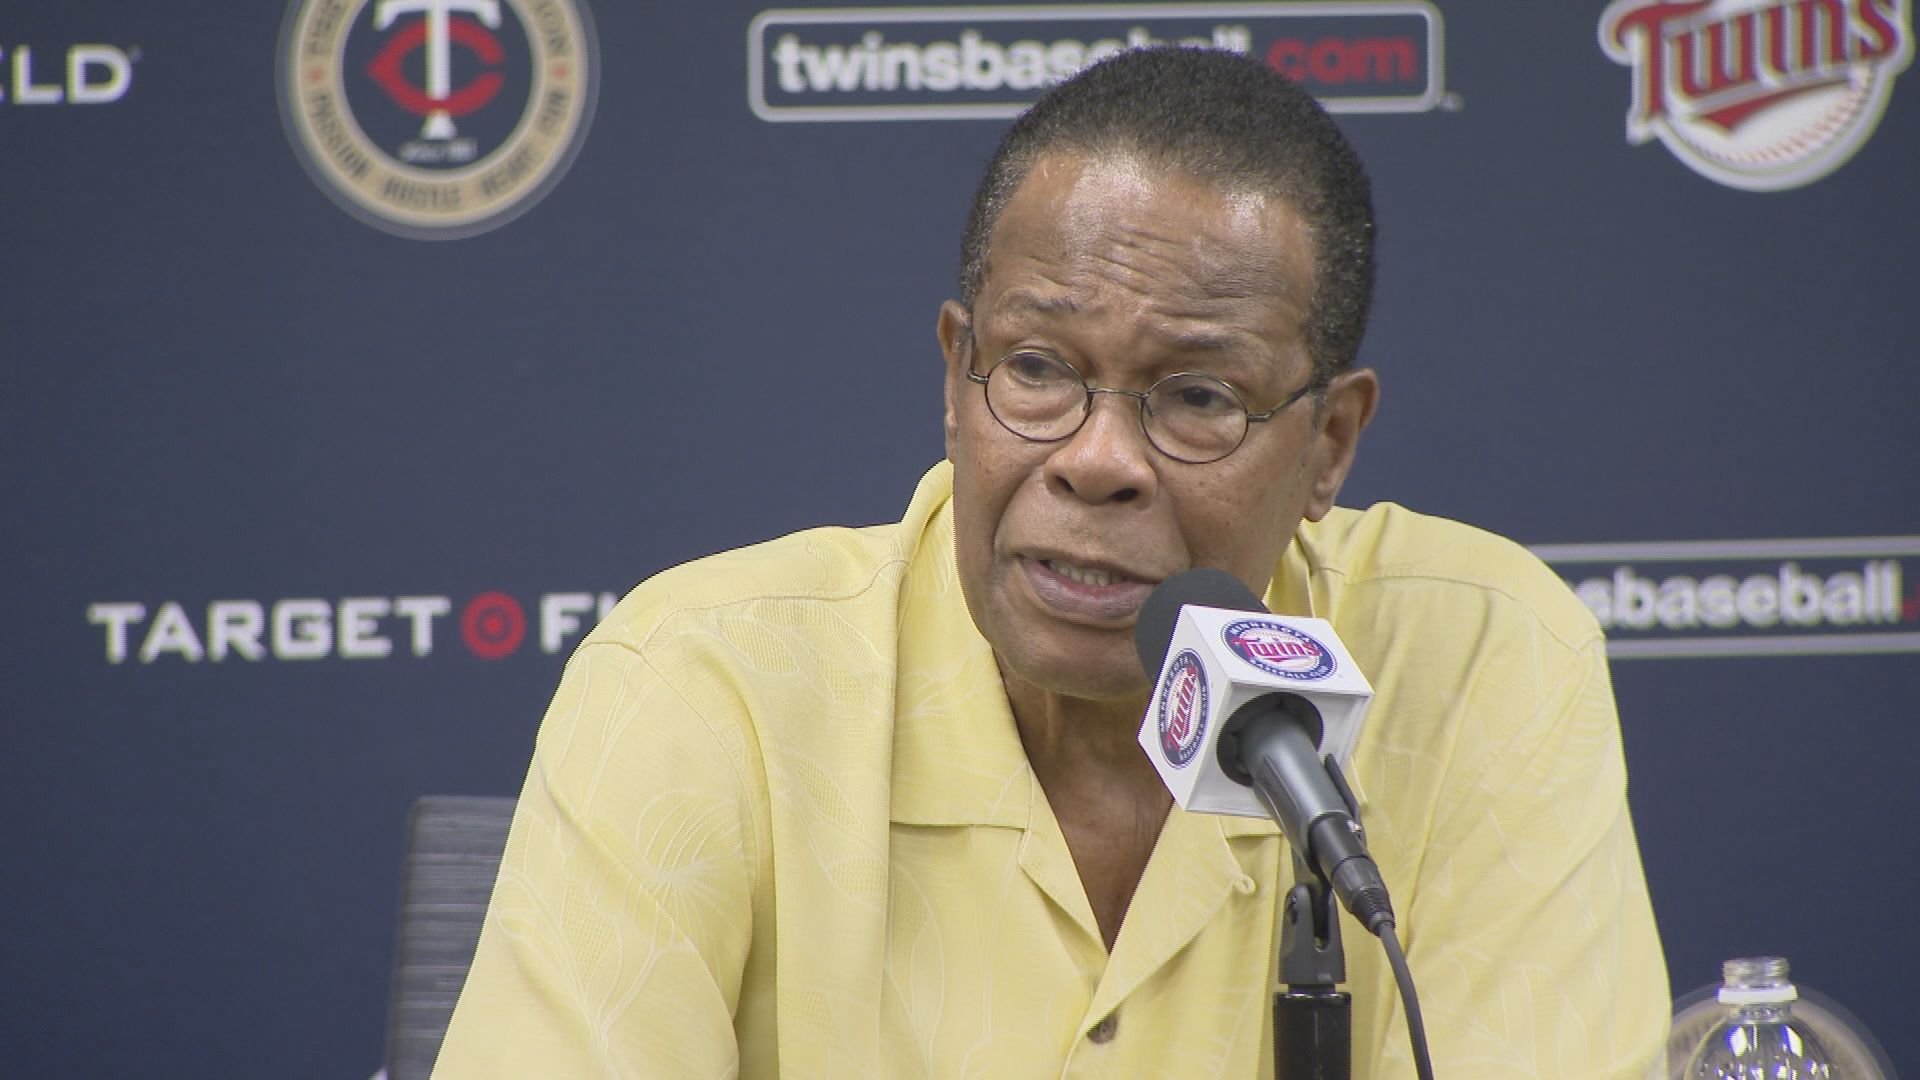 Hall of Famer Rod Carew in good condition after heart transplant operation  